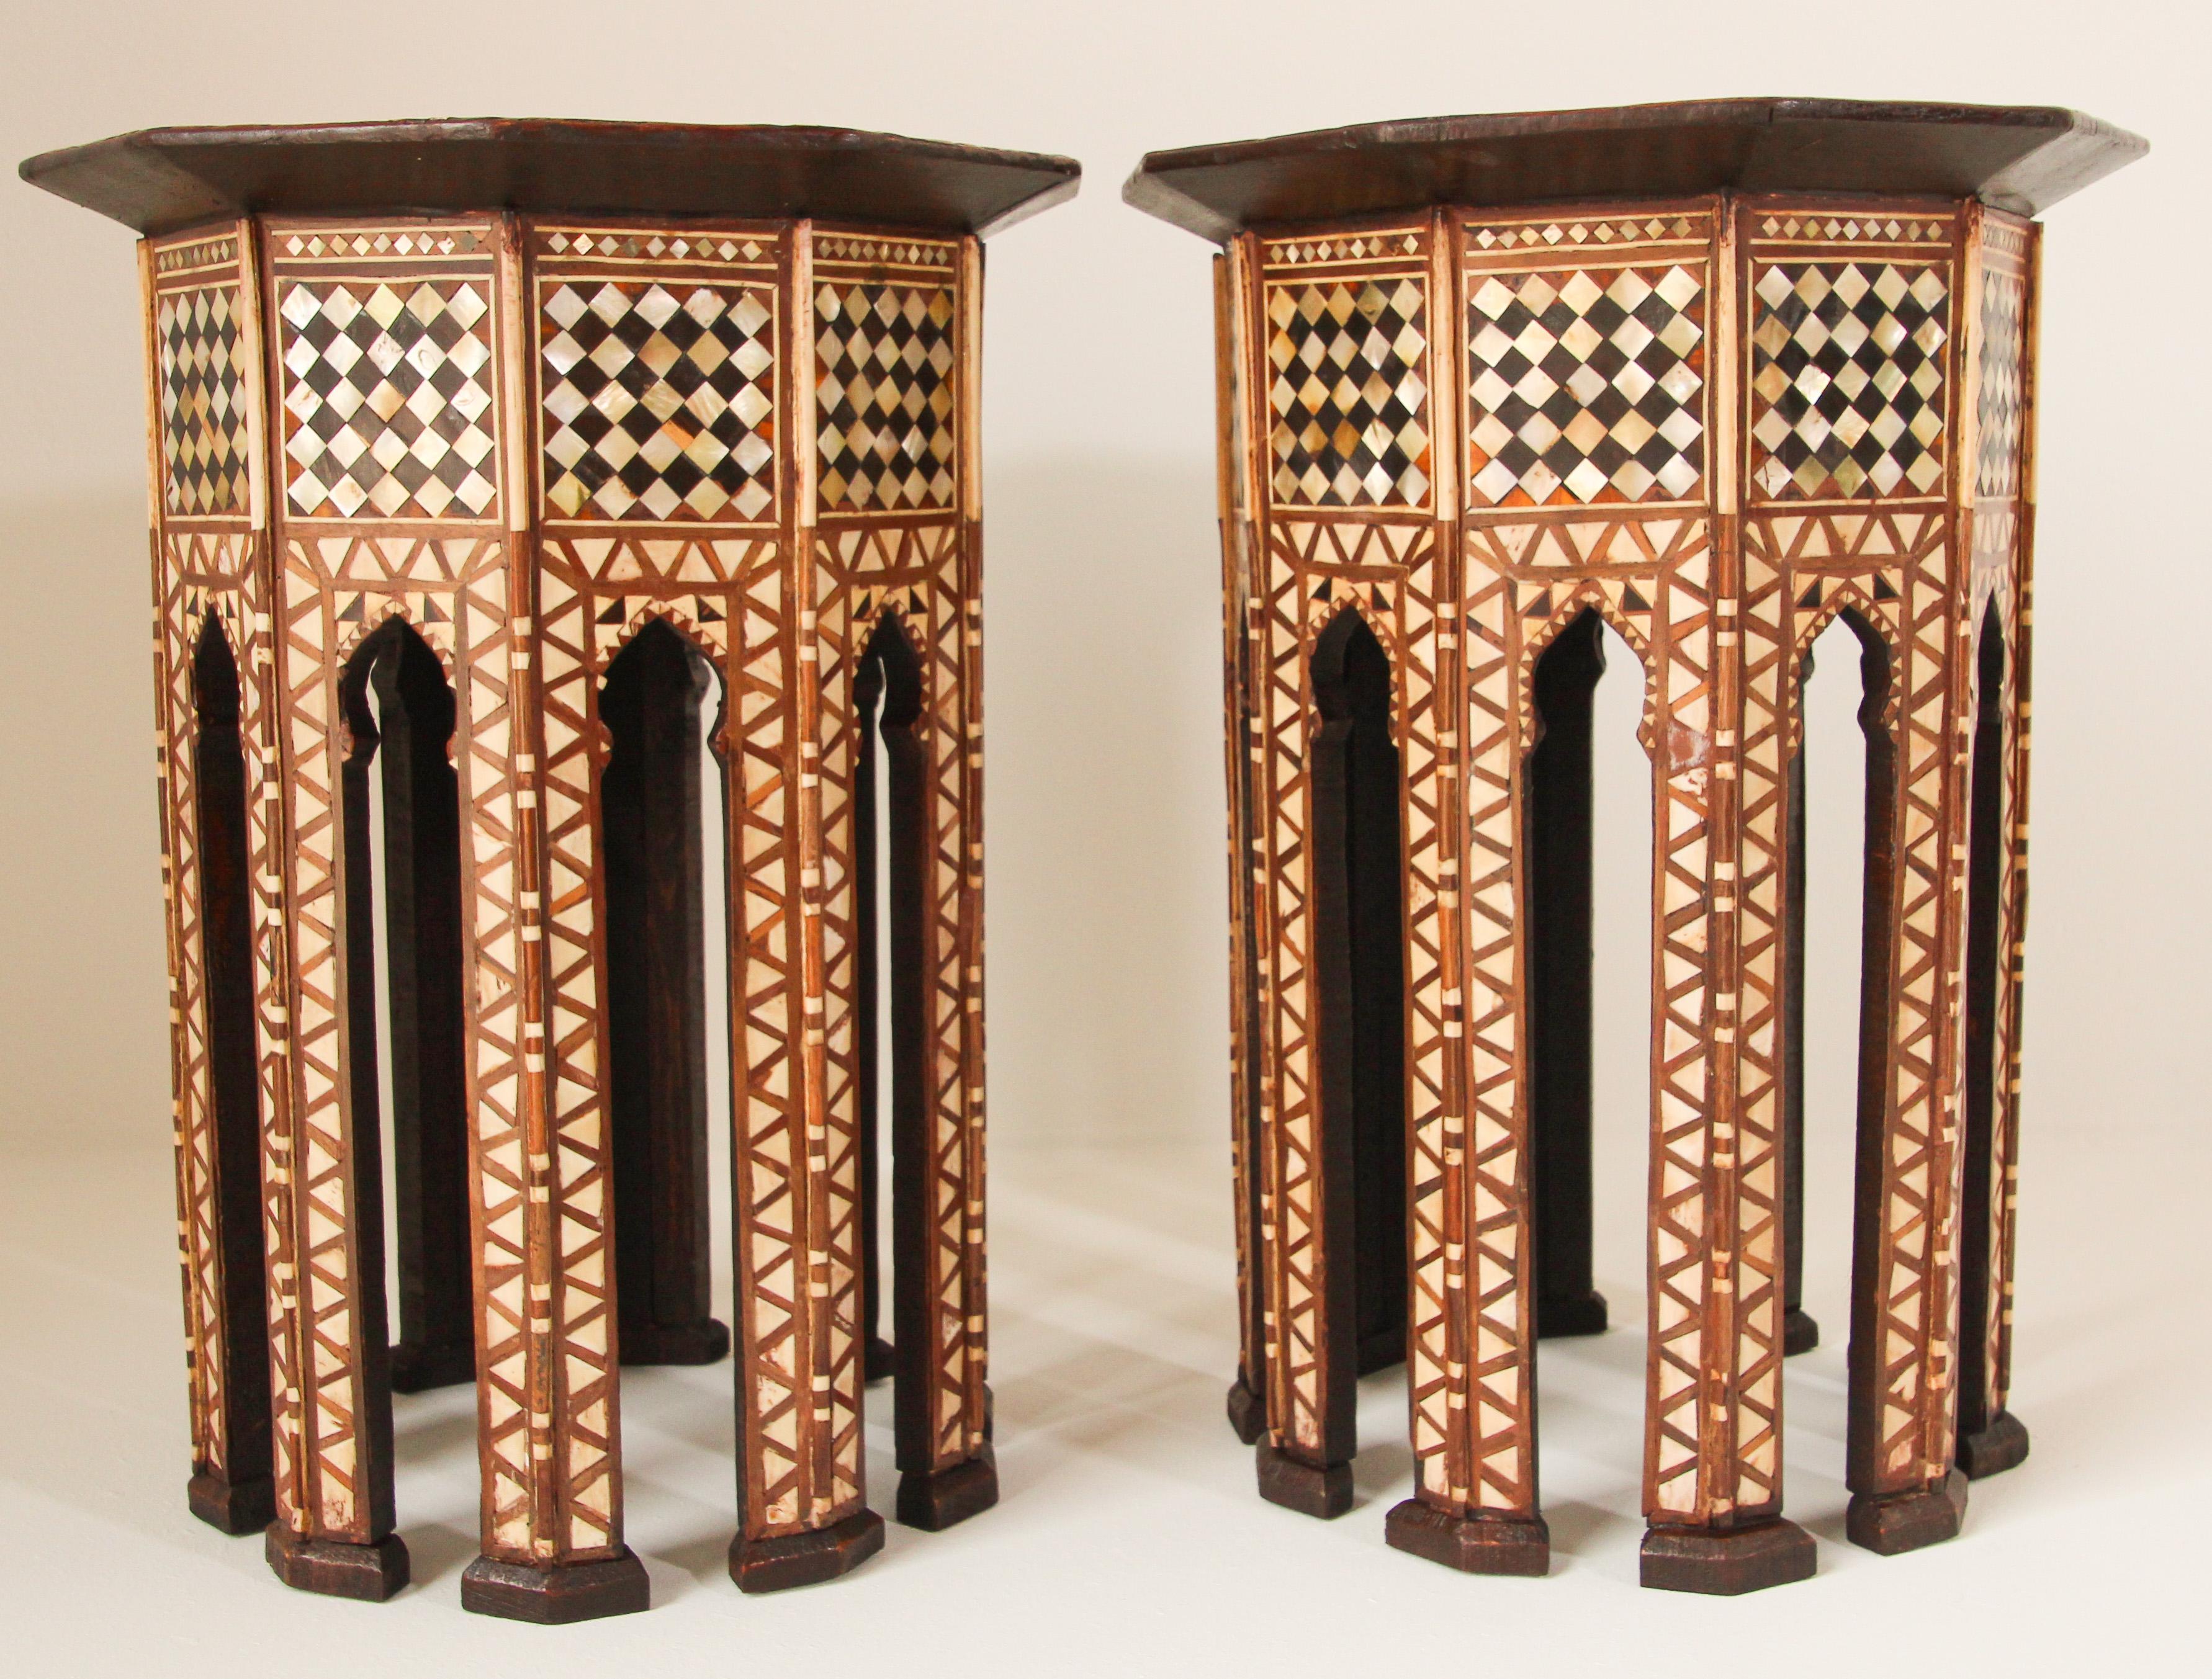 Hand-Crafted Middle East Syrian Octagonal Tables Inlaid